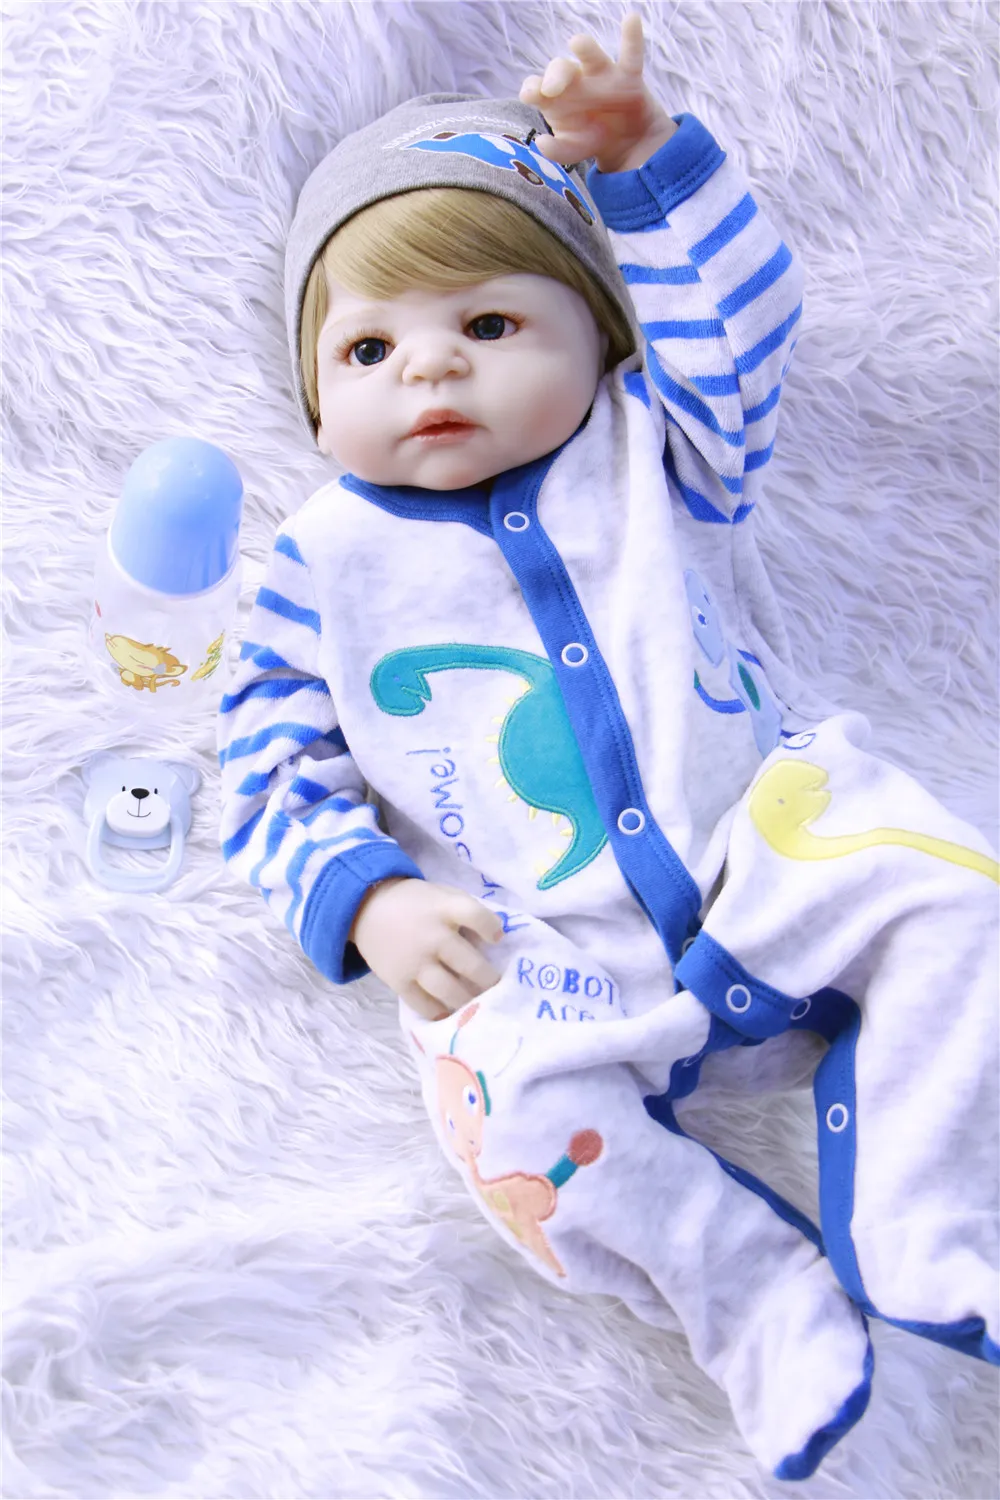 

57cm NPK Bebes Reborn Dolls Realistic Full Silicone Baby Boy Doll In Cute Soft Plush Clothes Alive Baby Dolls As Girls Playmate